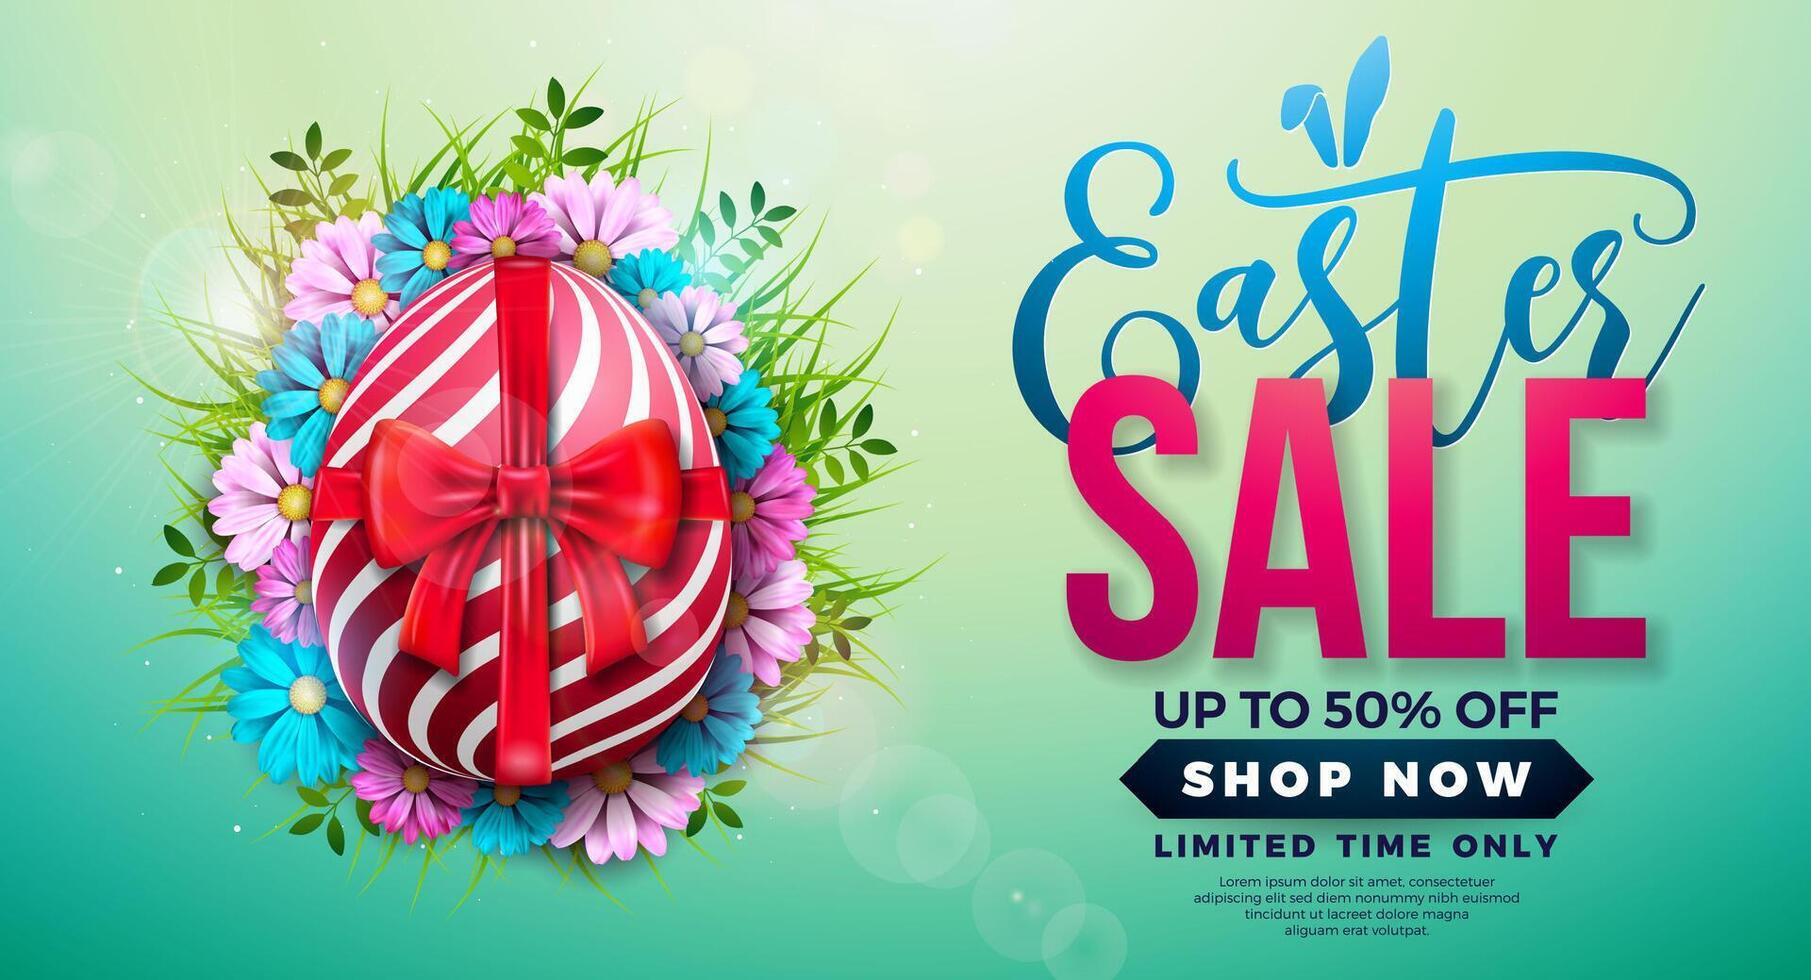 Easter Sale Illustration with Painted Egg, Red Bow and Spring Flower on Shiny Light Background.. Vector Easter Holiday Design Template for Coupon, Banner, Voucher or Promotional Poster.